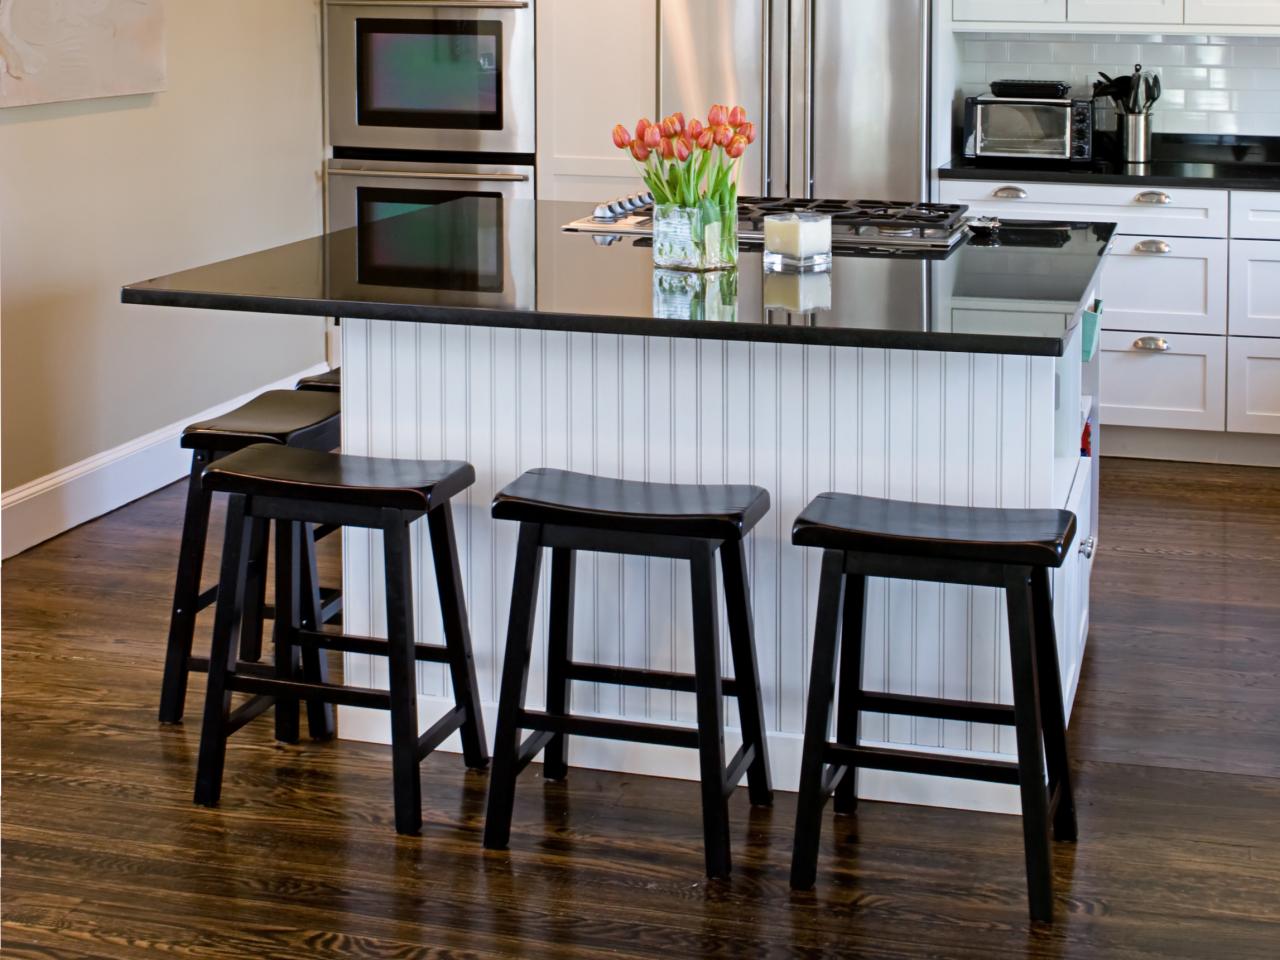 How to Build a Kitchen Island With Breakfast Bar  